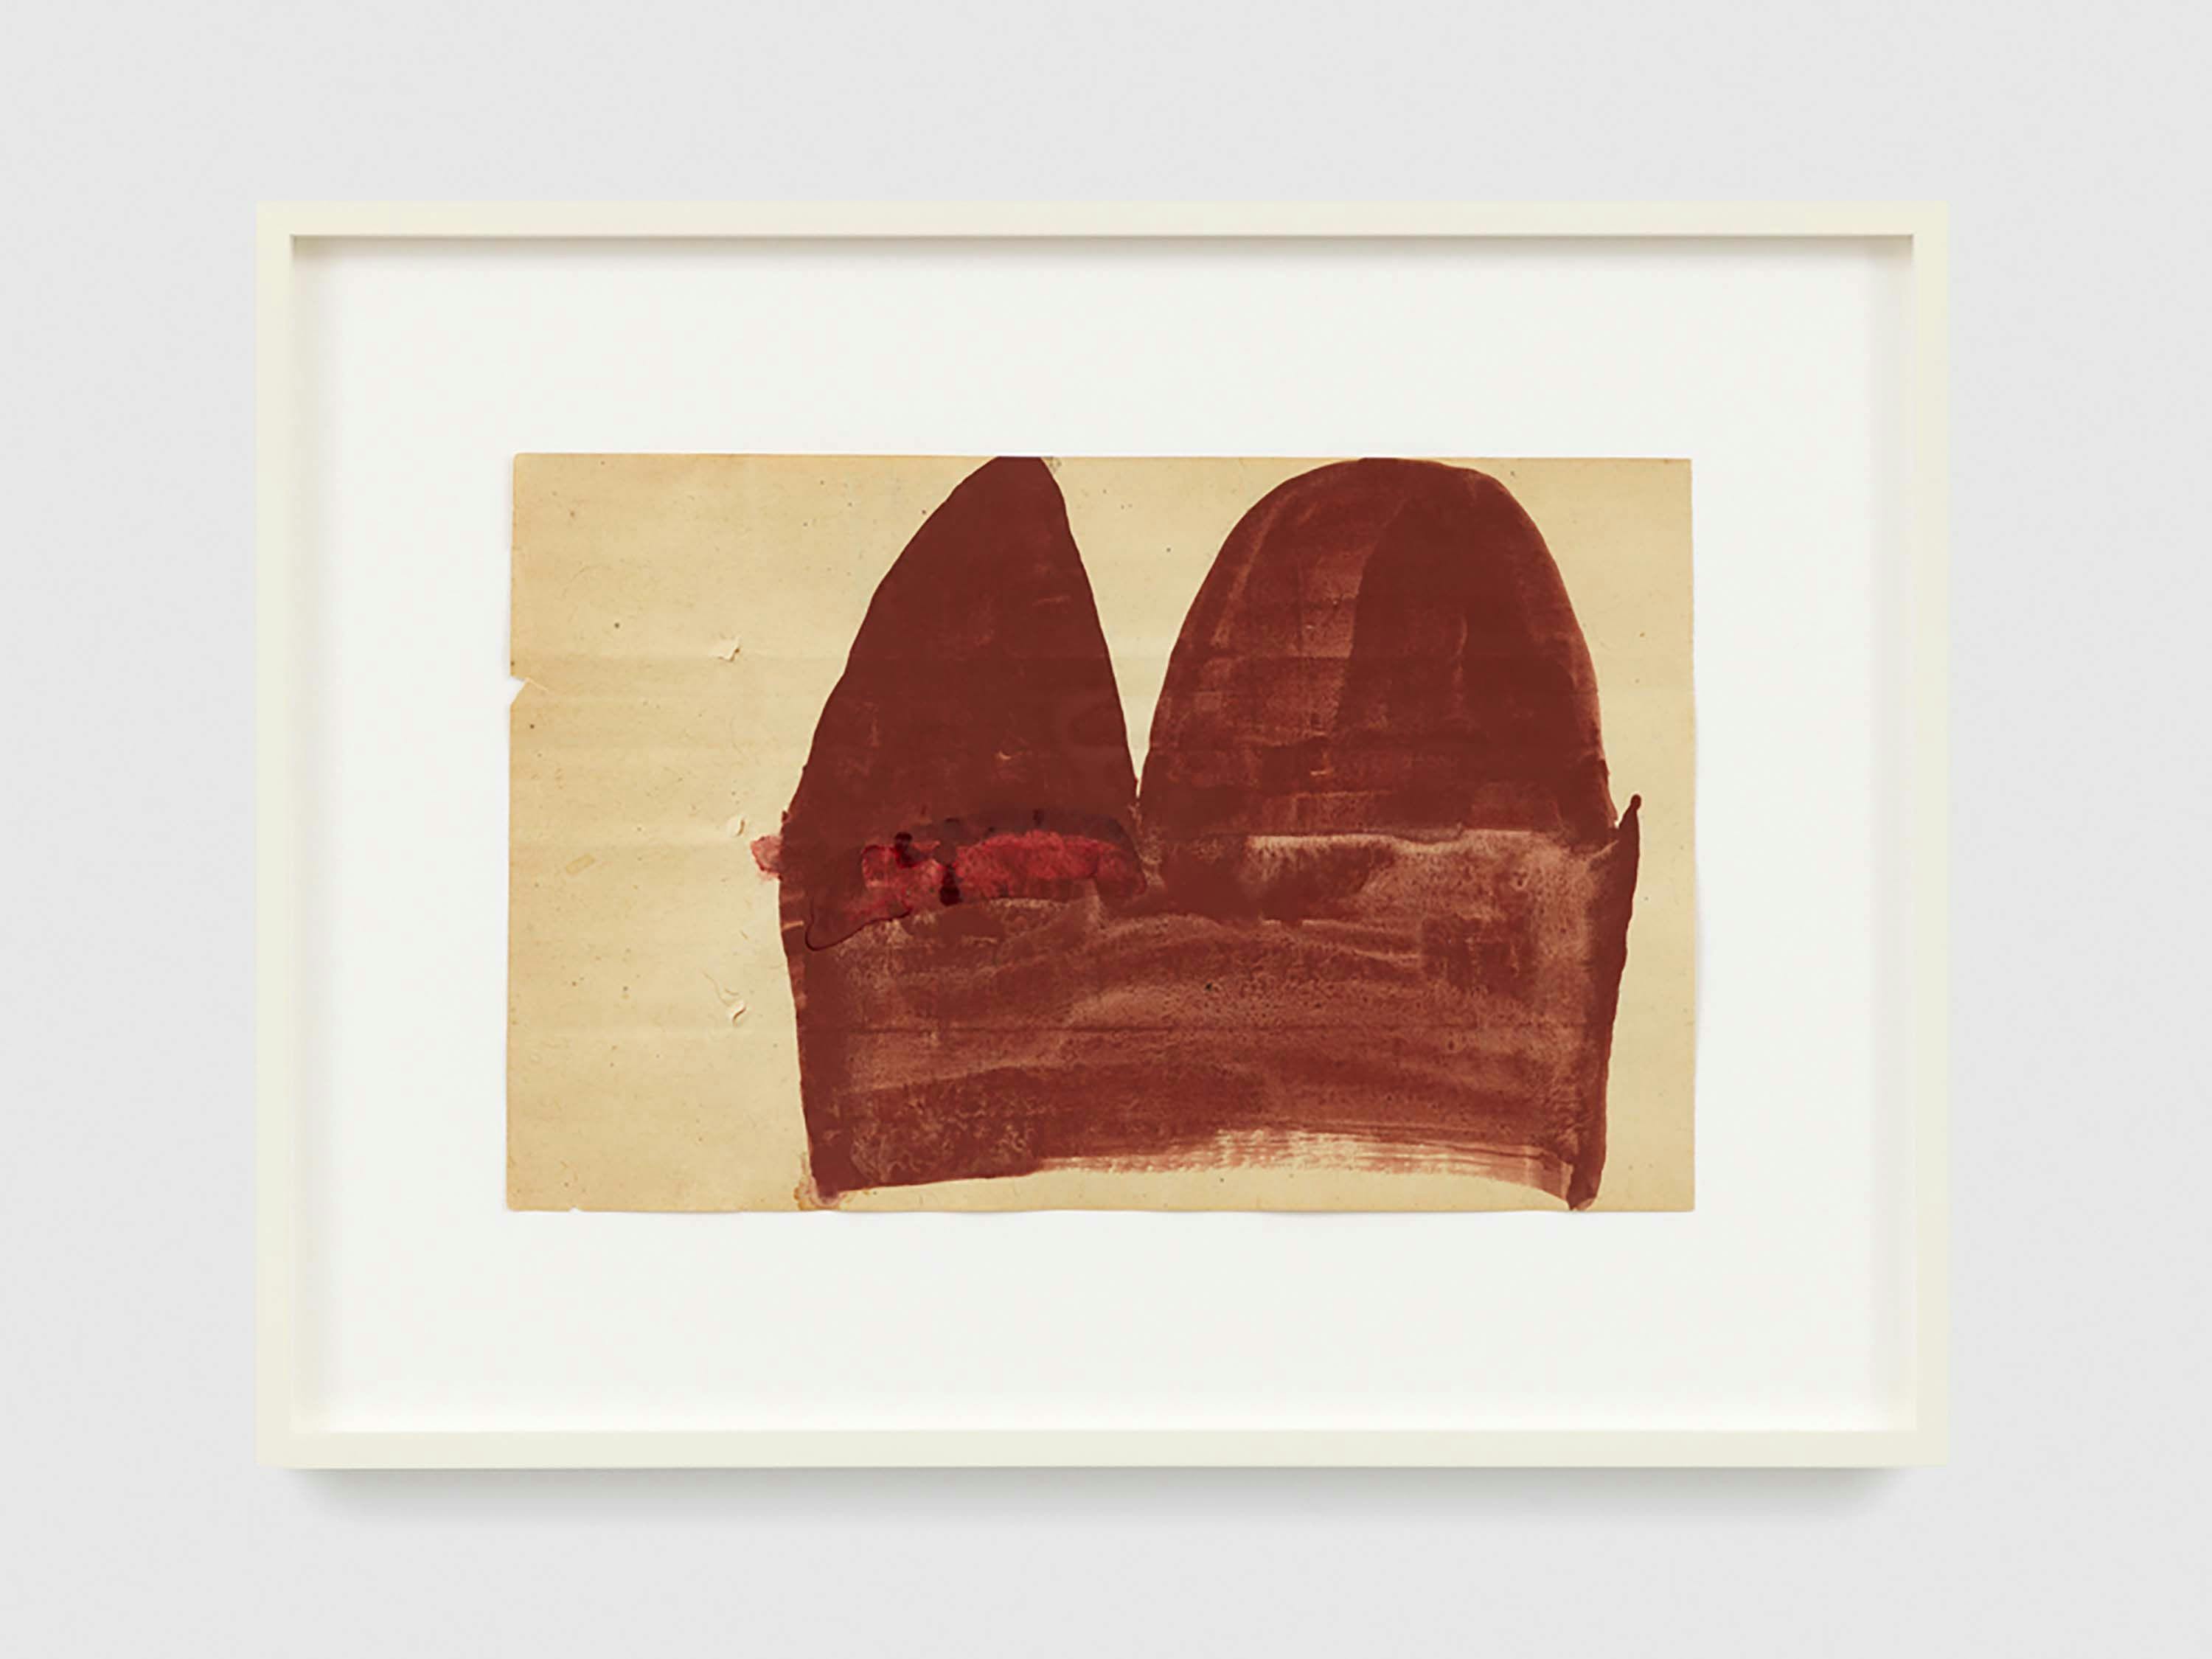 A work on paper by Suzan Frecon, titled Dark Red Cathedral Sketch, 2015 to 2016.